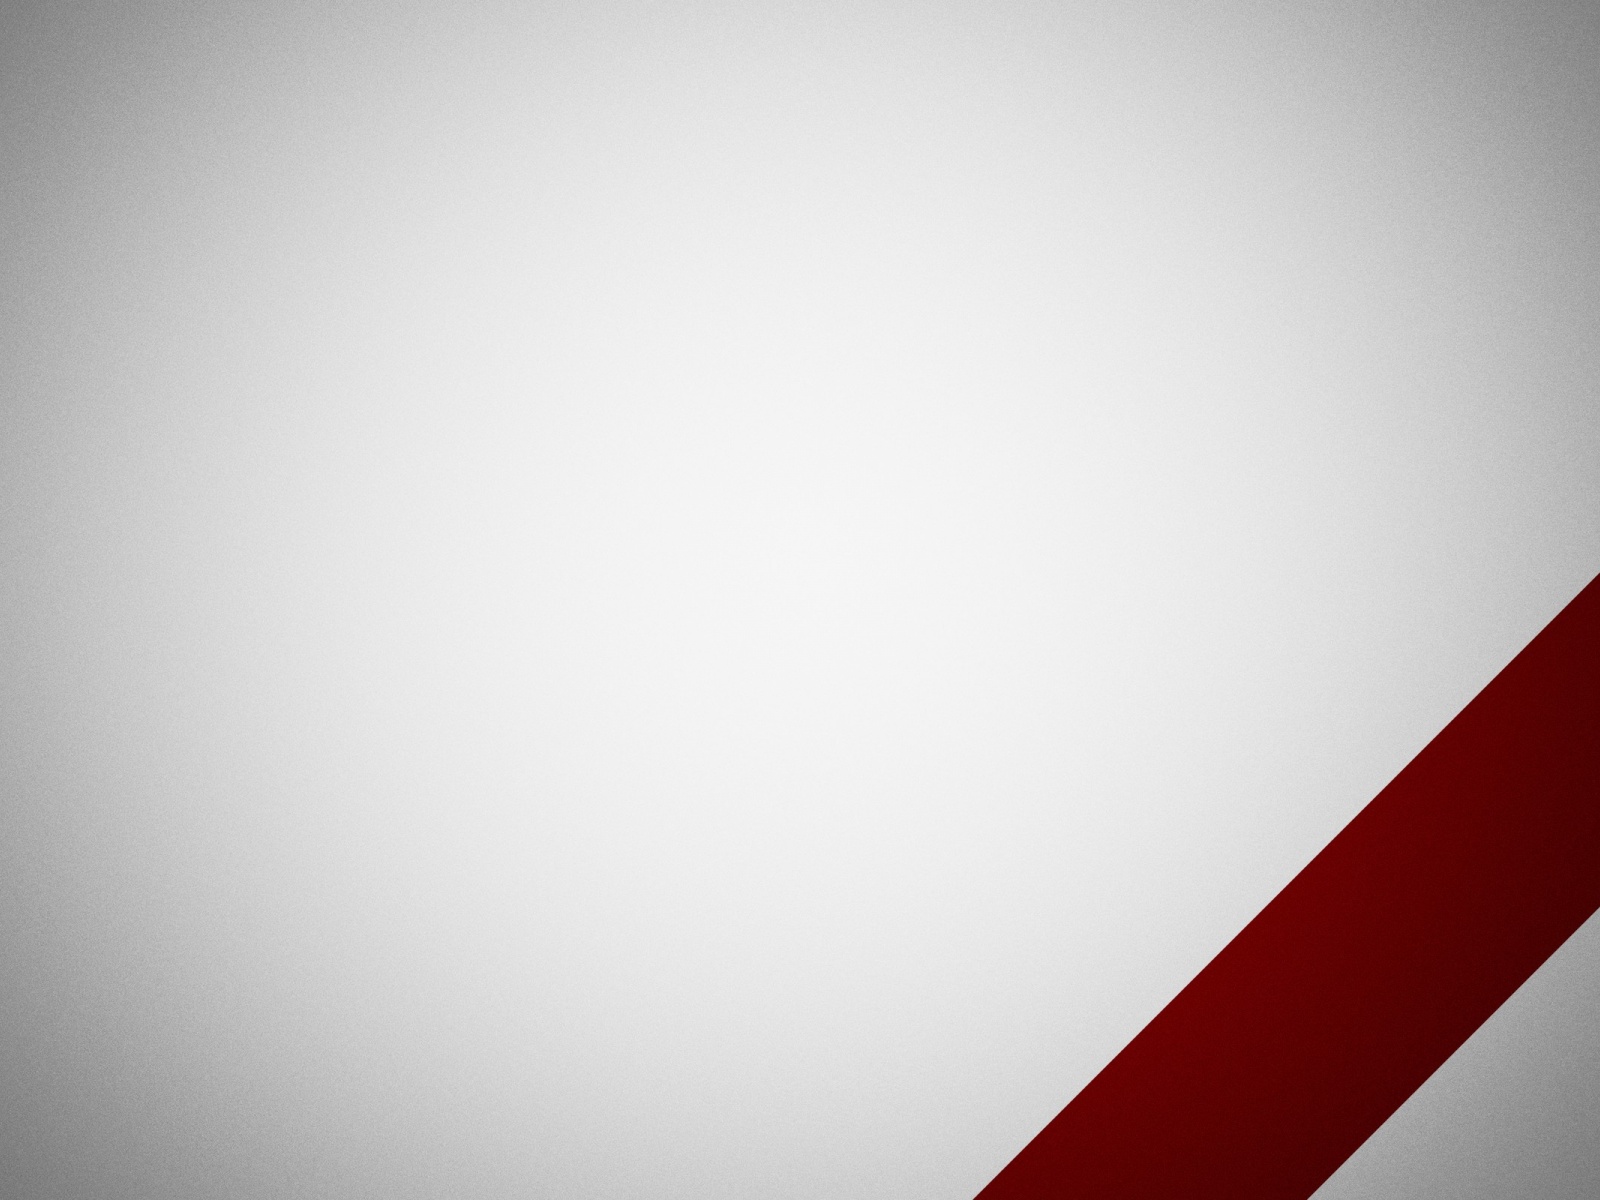 73+] Red And White Backgrounds - WallpaperSafari